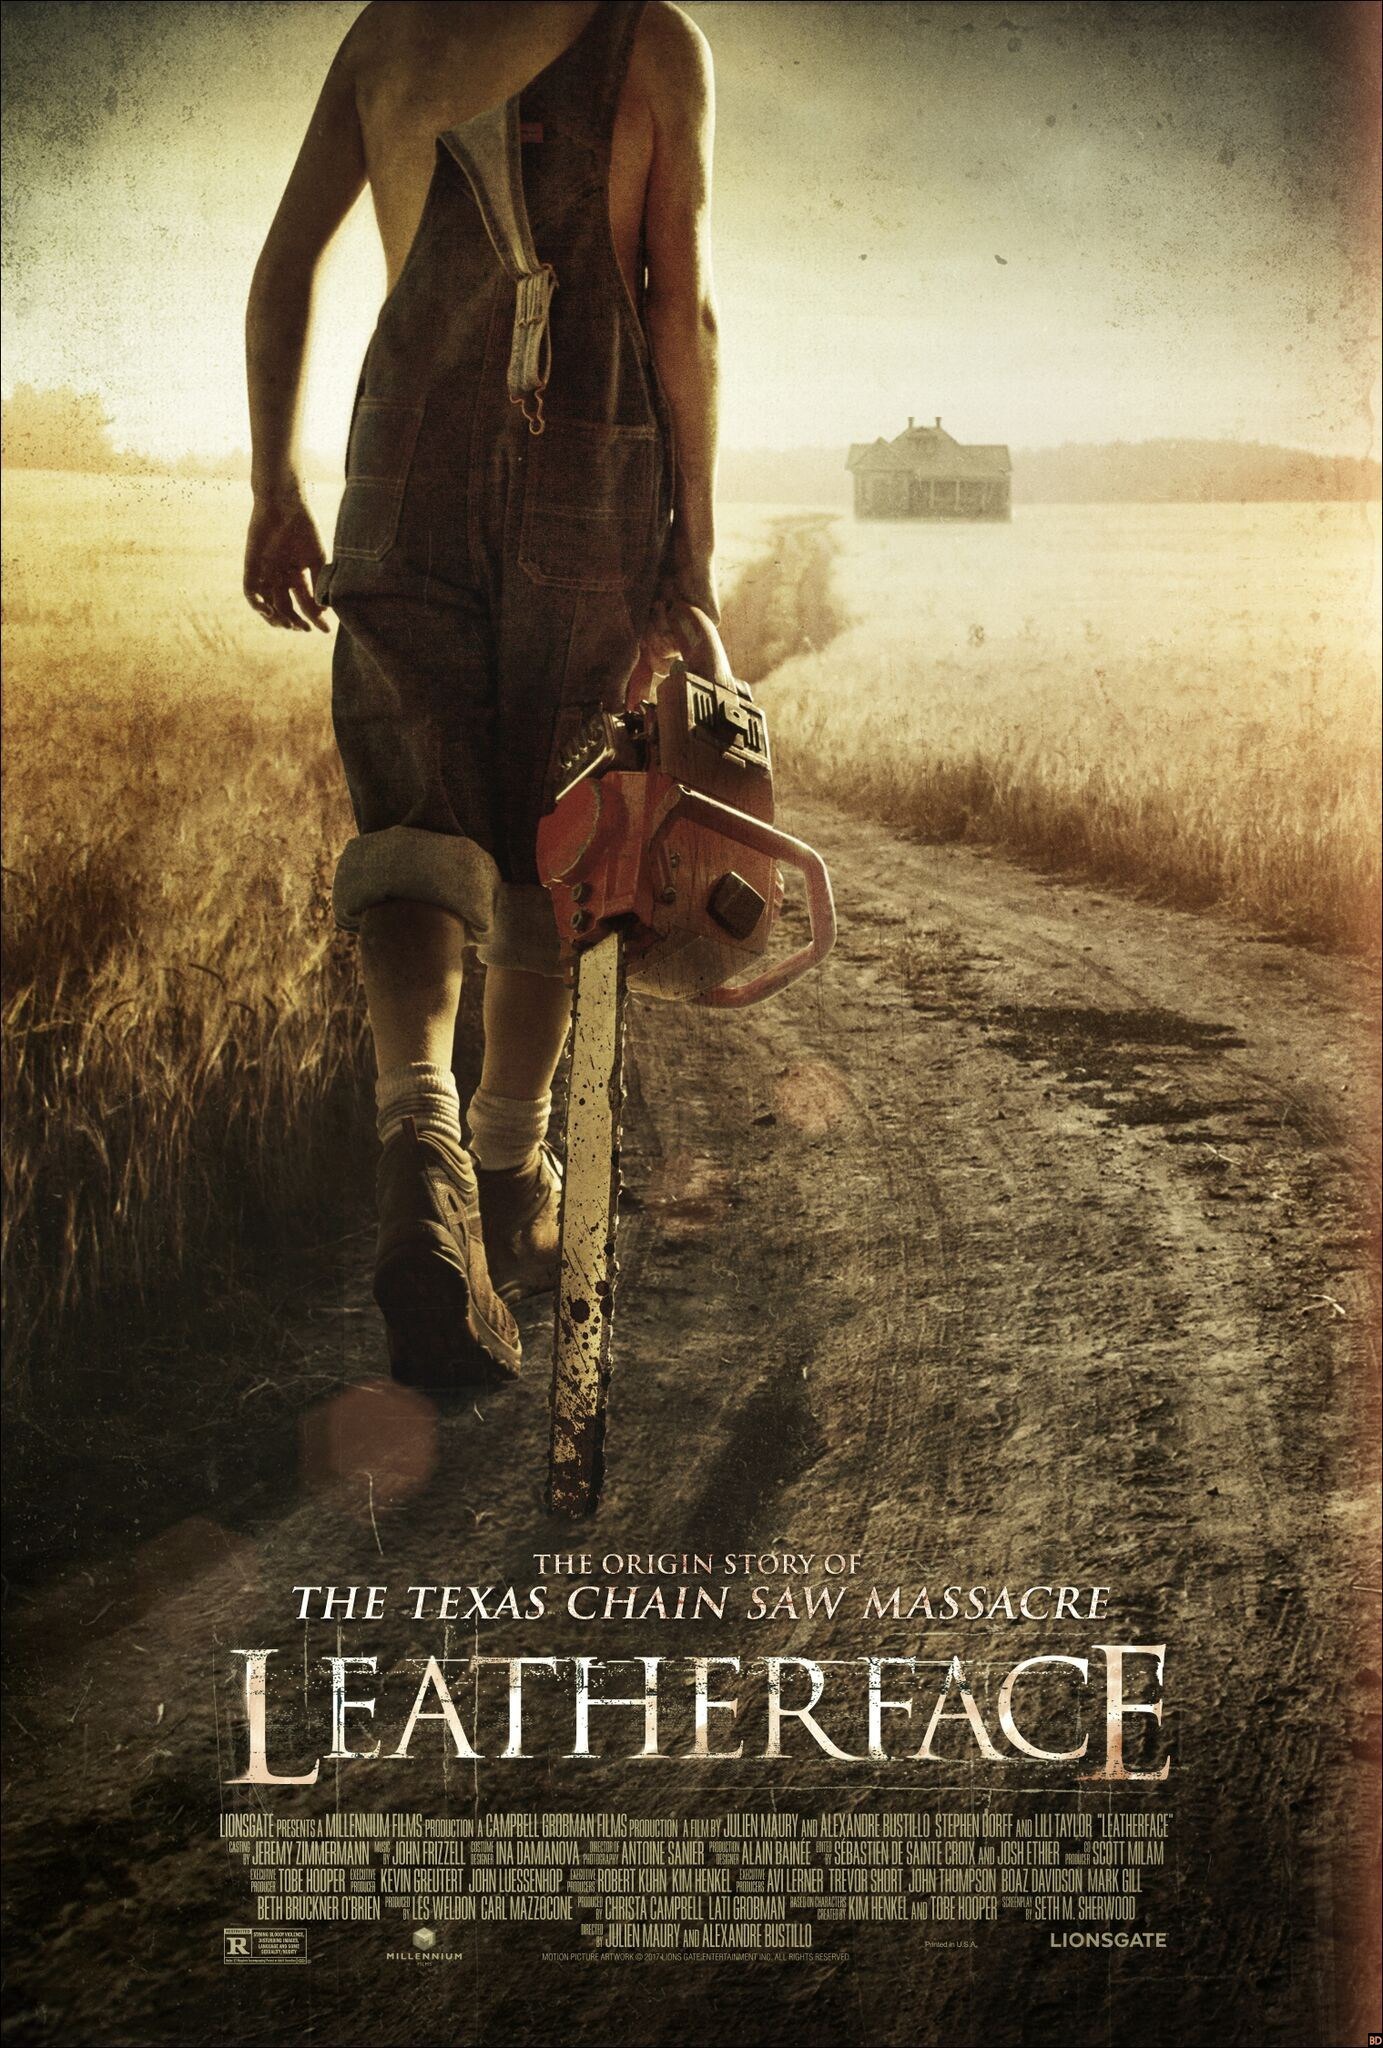 Mega Sized Movie Poster Image for Leatherface (#2 of 2)